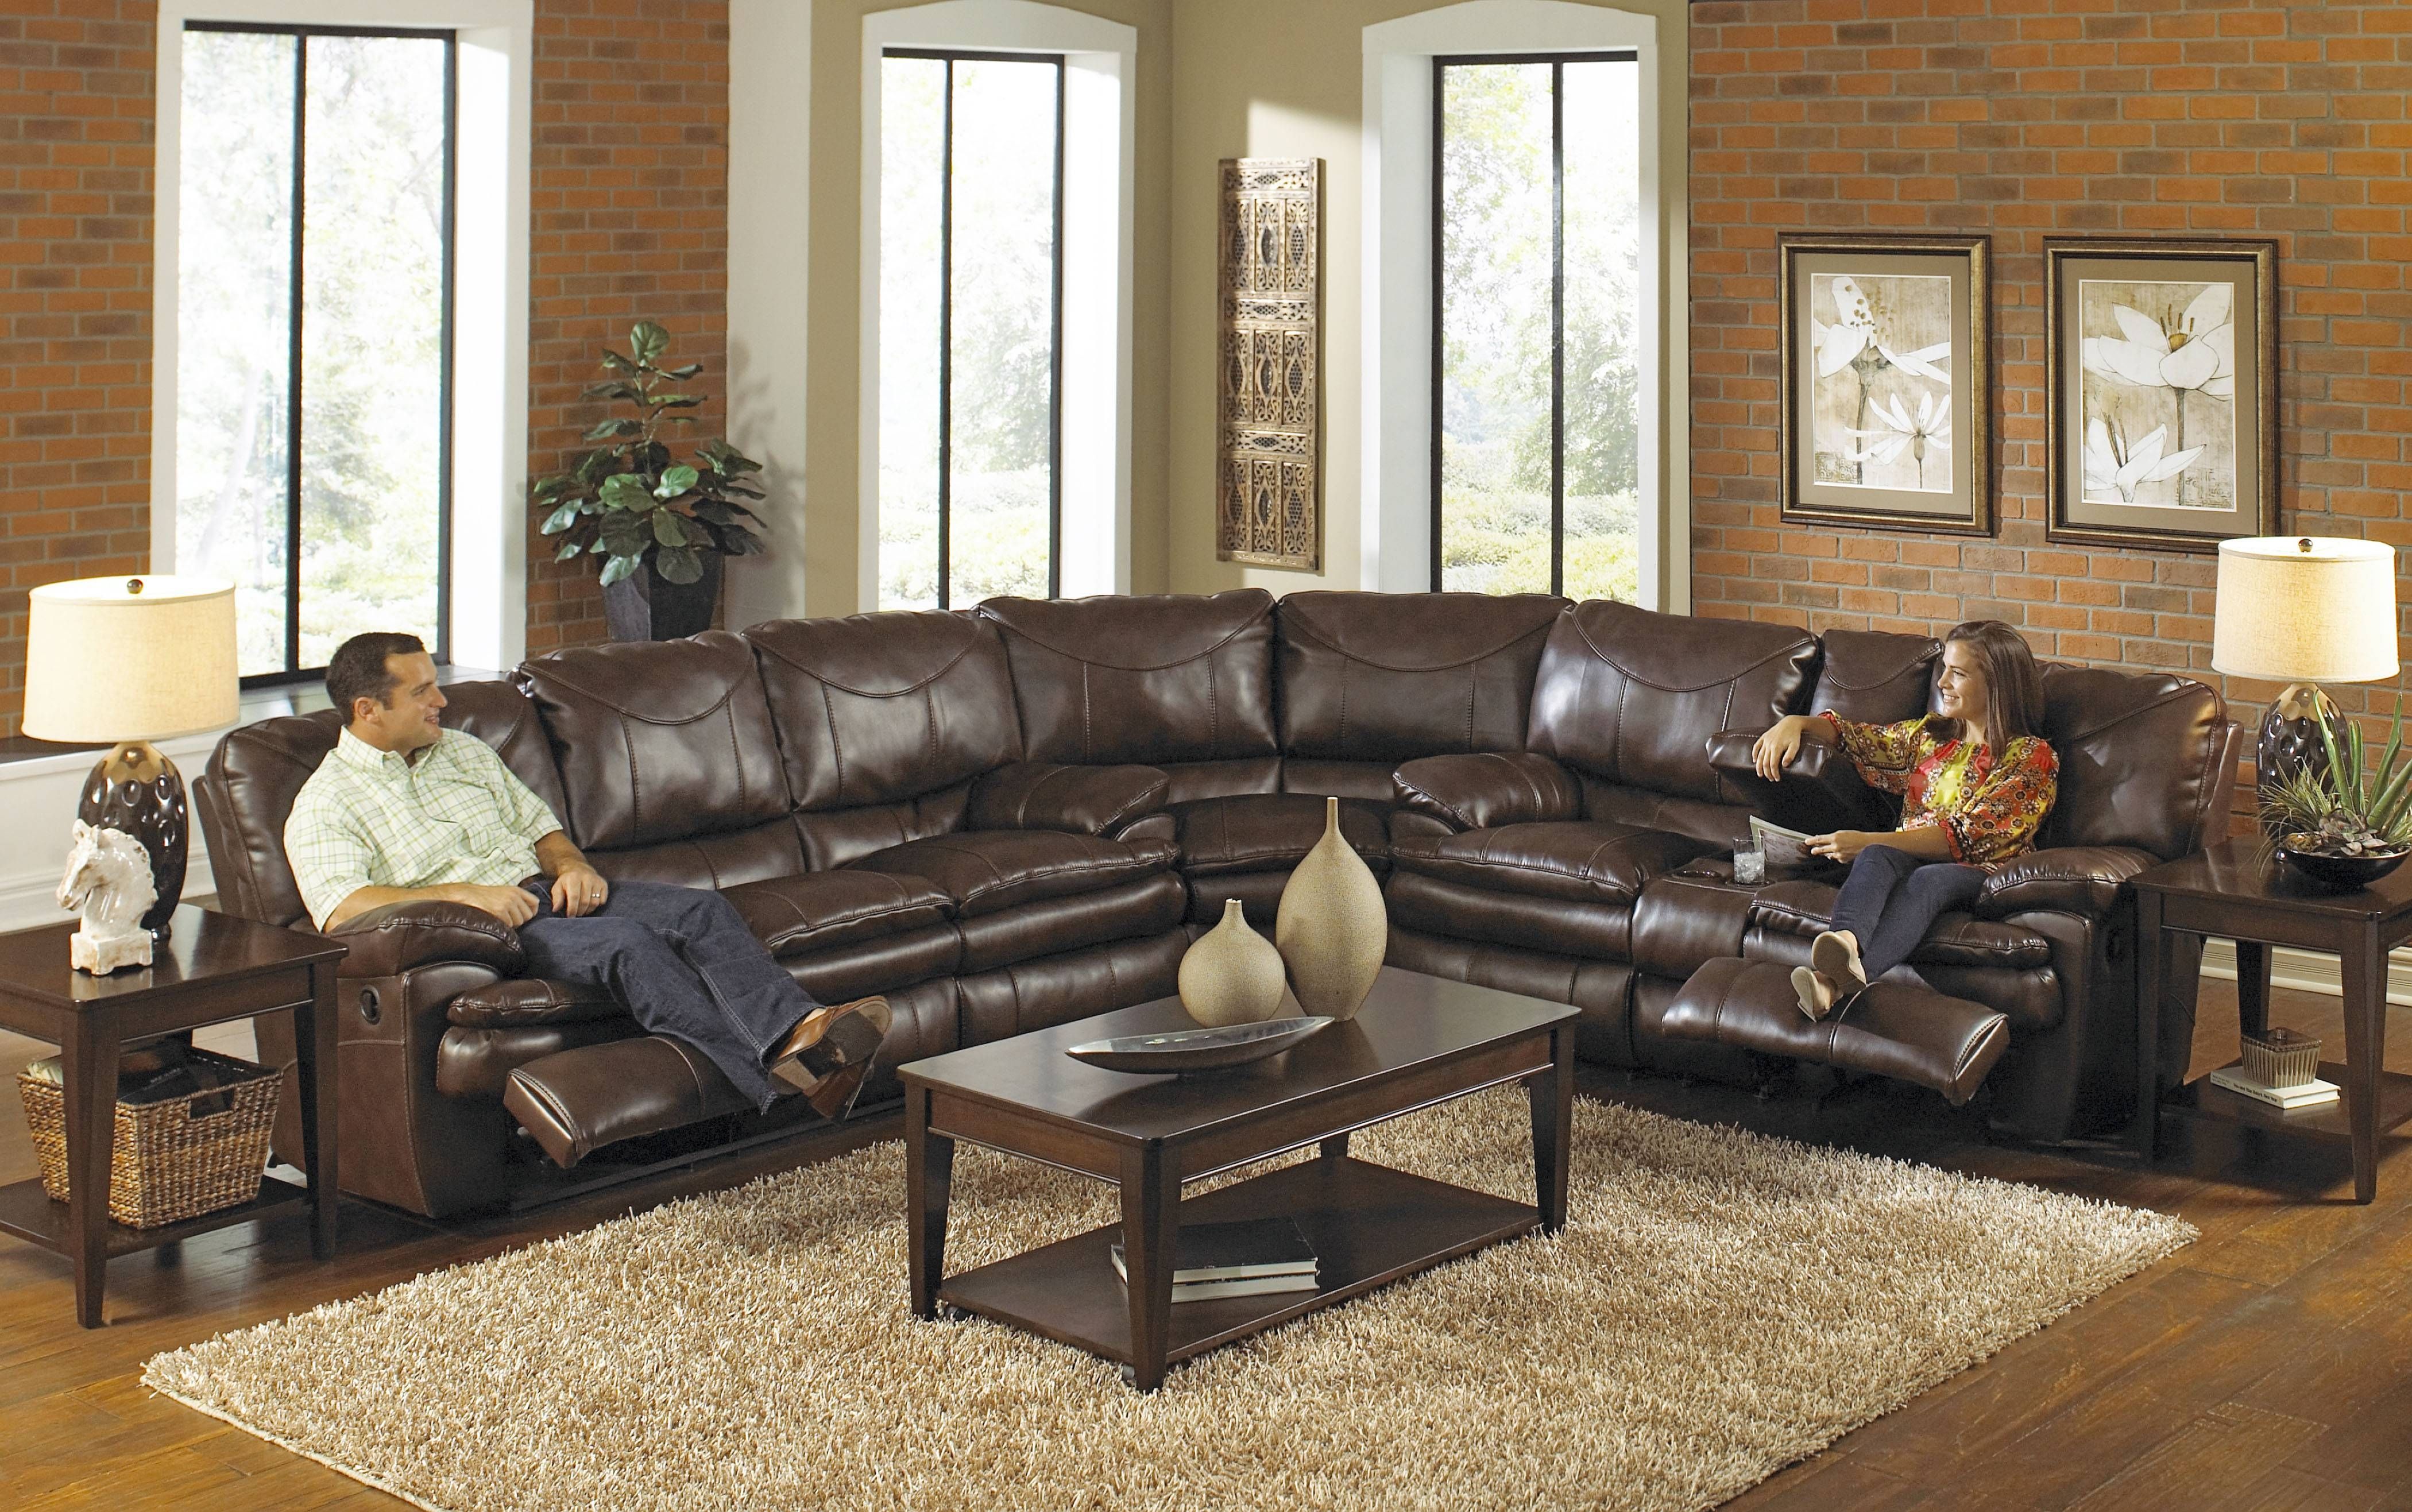 New Oversized Leather Sectional Sofa 72 With Additional Condo With Condo Sectional Sofas (View 26 of 30)